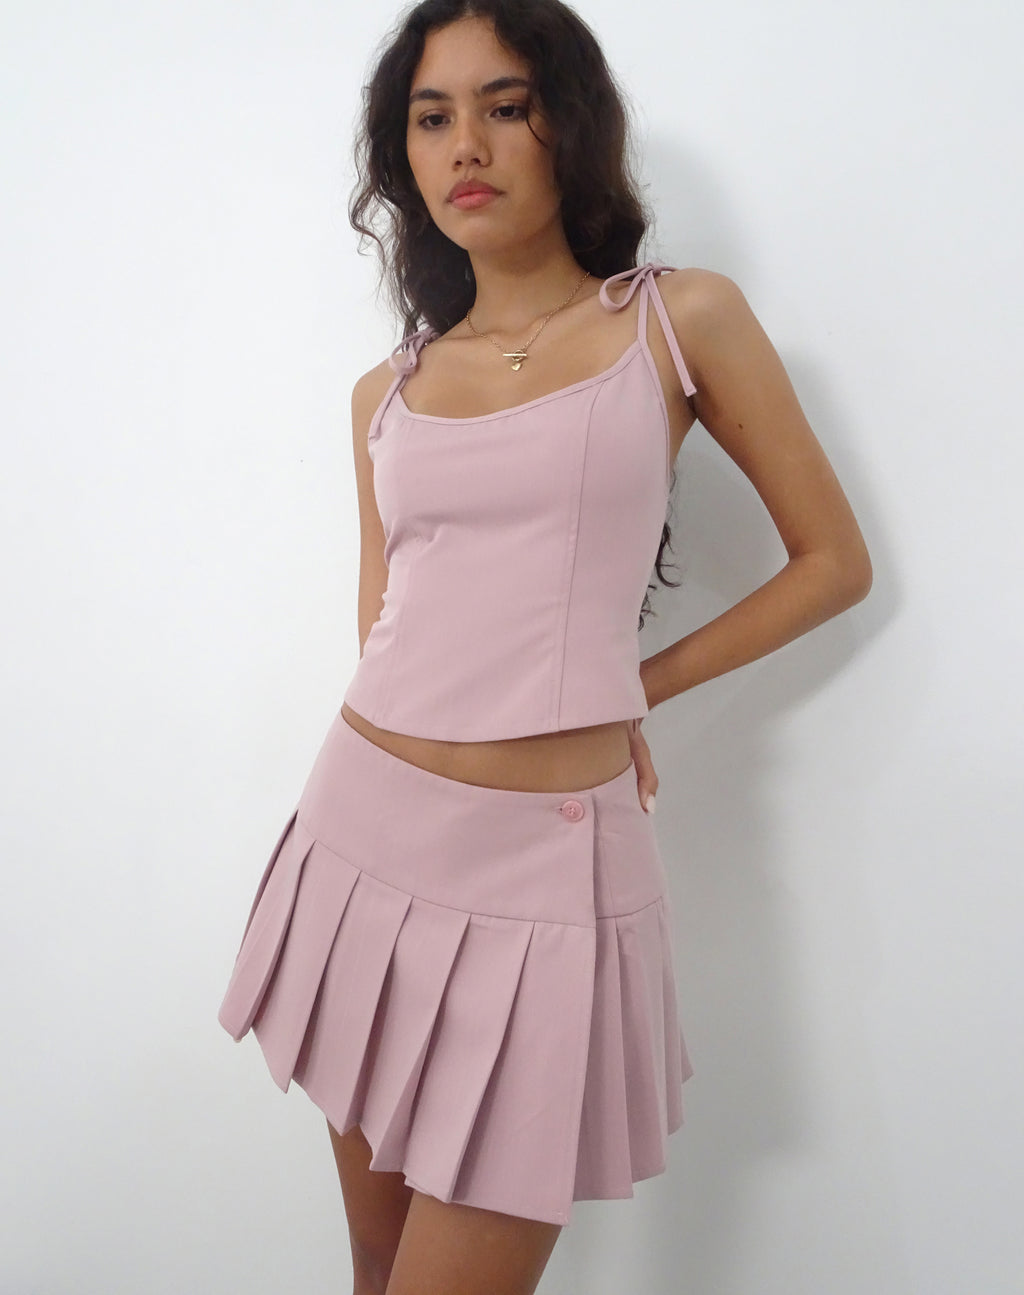 Casini Pleated Micro Skirt in Pink